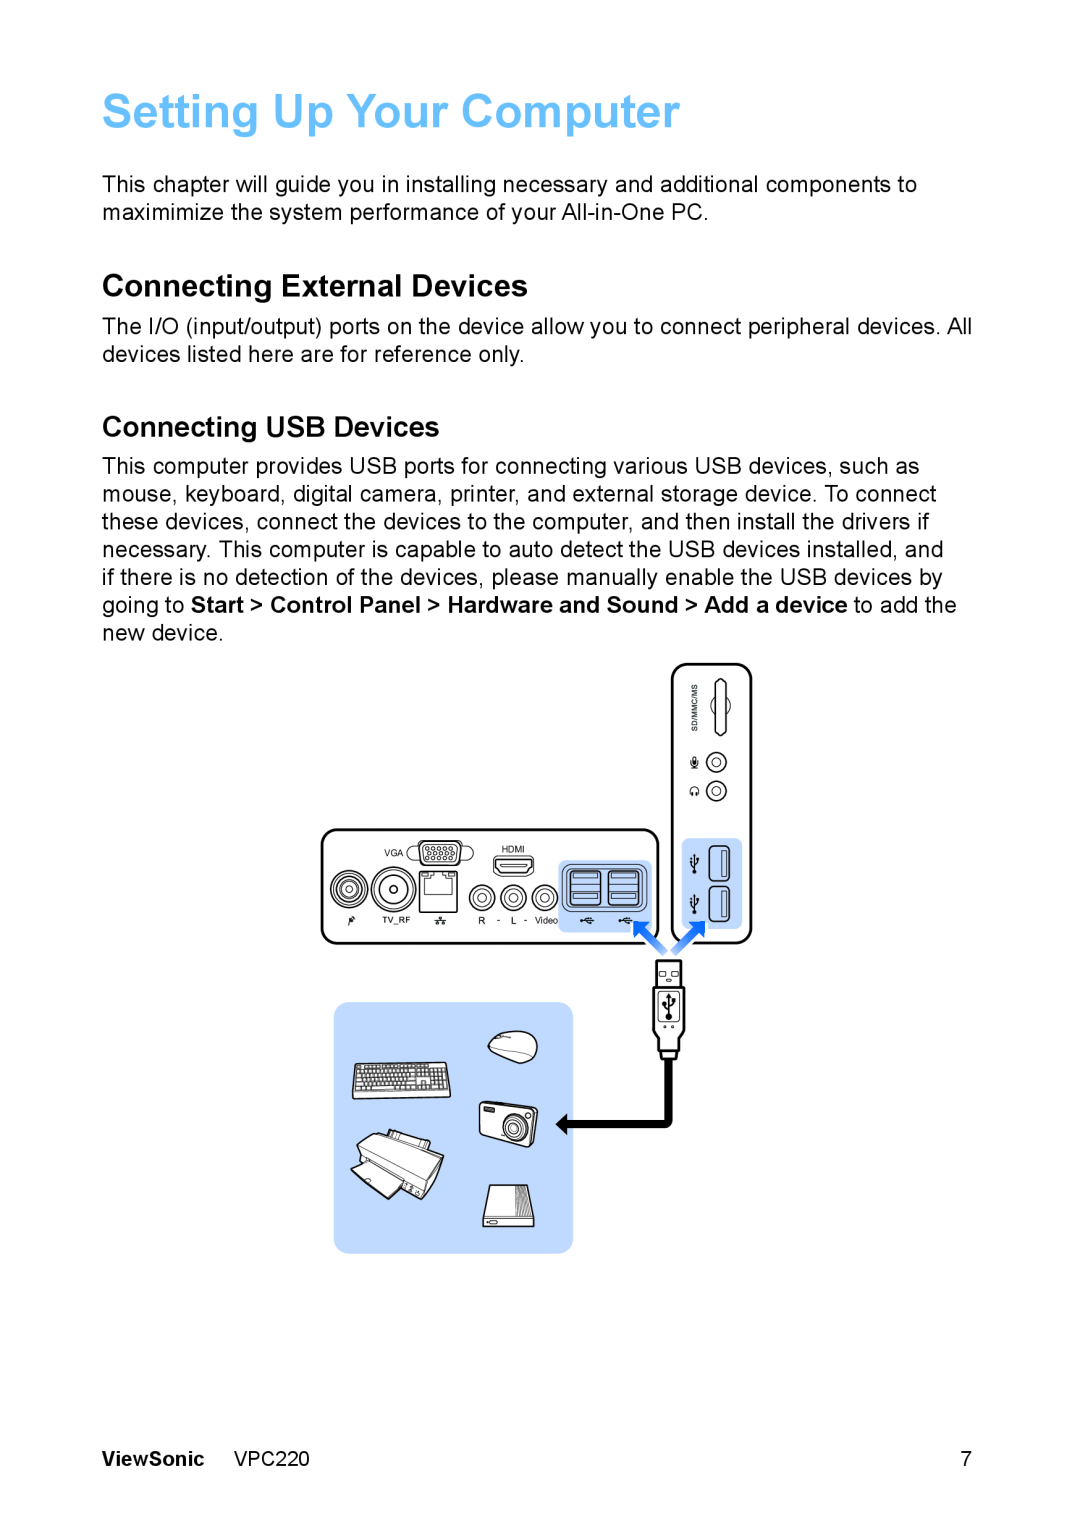 ViewSonic VS13426 manual Setting Up Your Computer, Connecting External Devices, Connecting USB Devices 